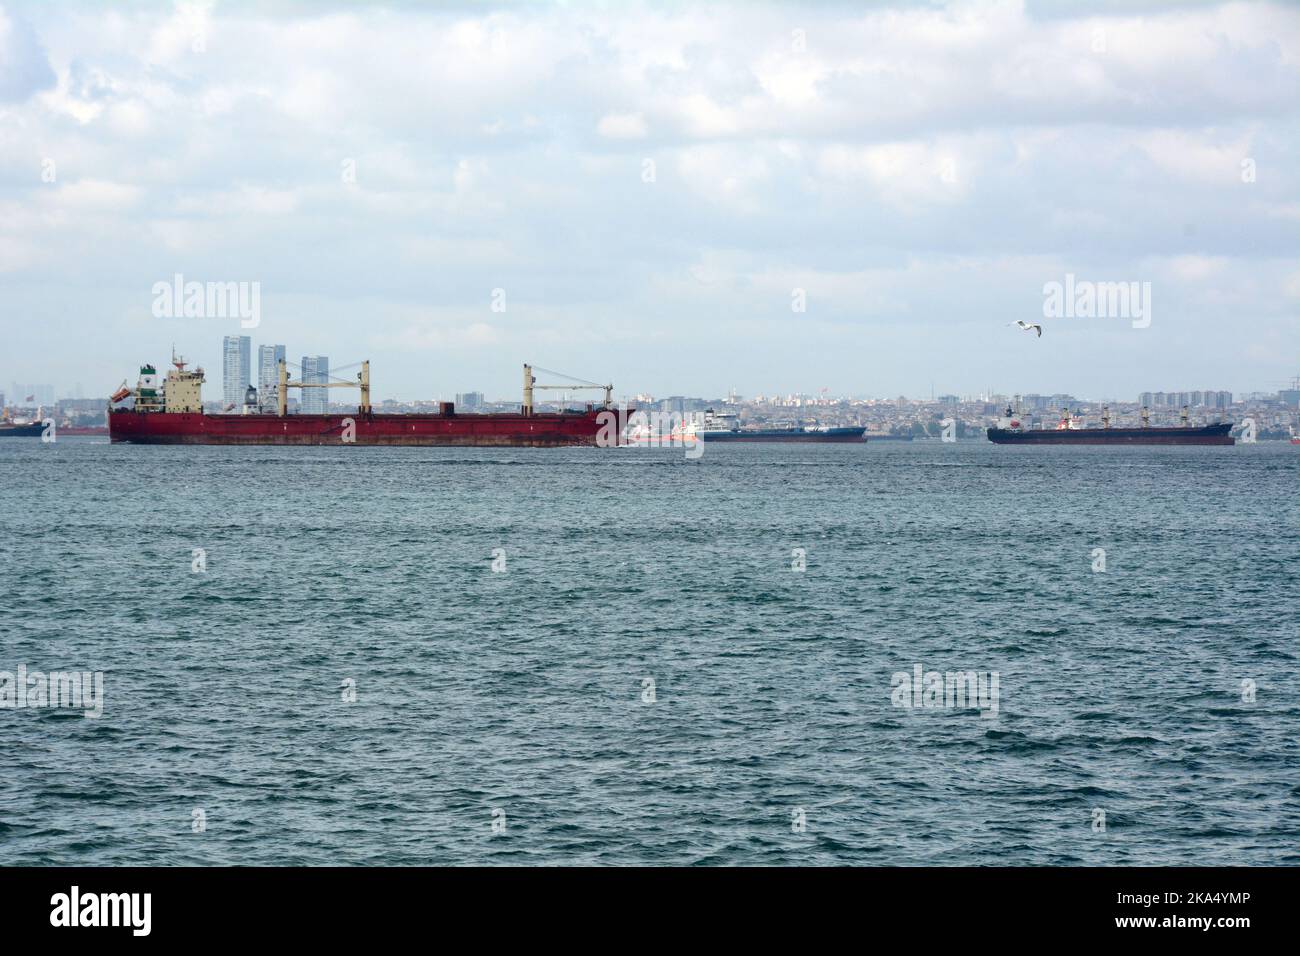 Bulk carrier merchant grain ships bound for Ukraine and Russia await entry in the Sea of Marmara at the south end of the Strait of Bosphorus, Turkey. Stock Photo